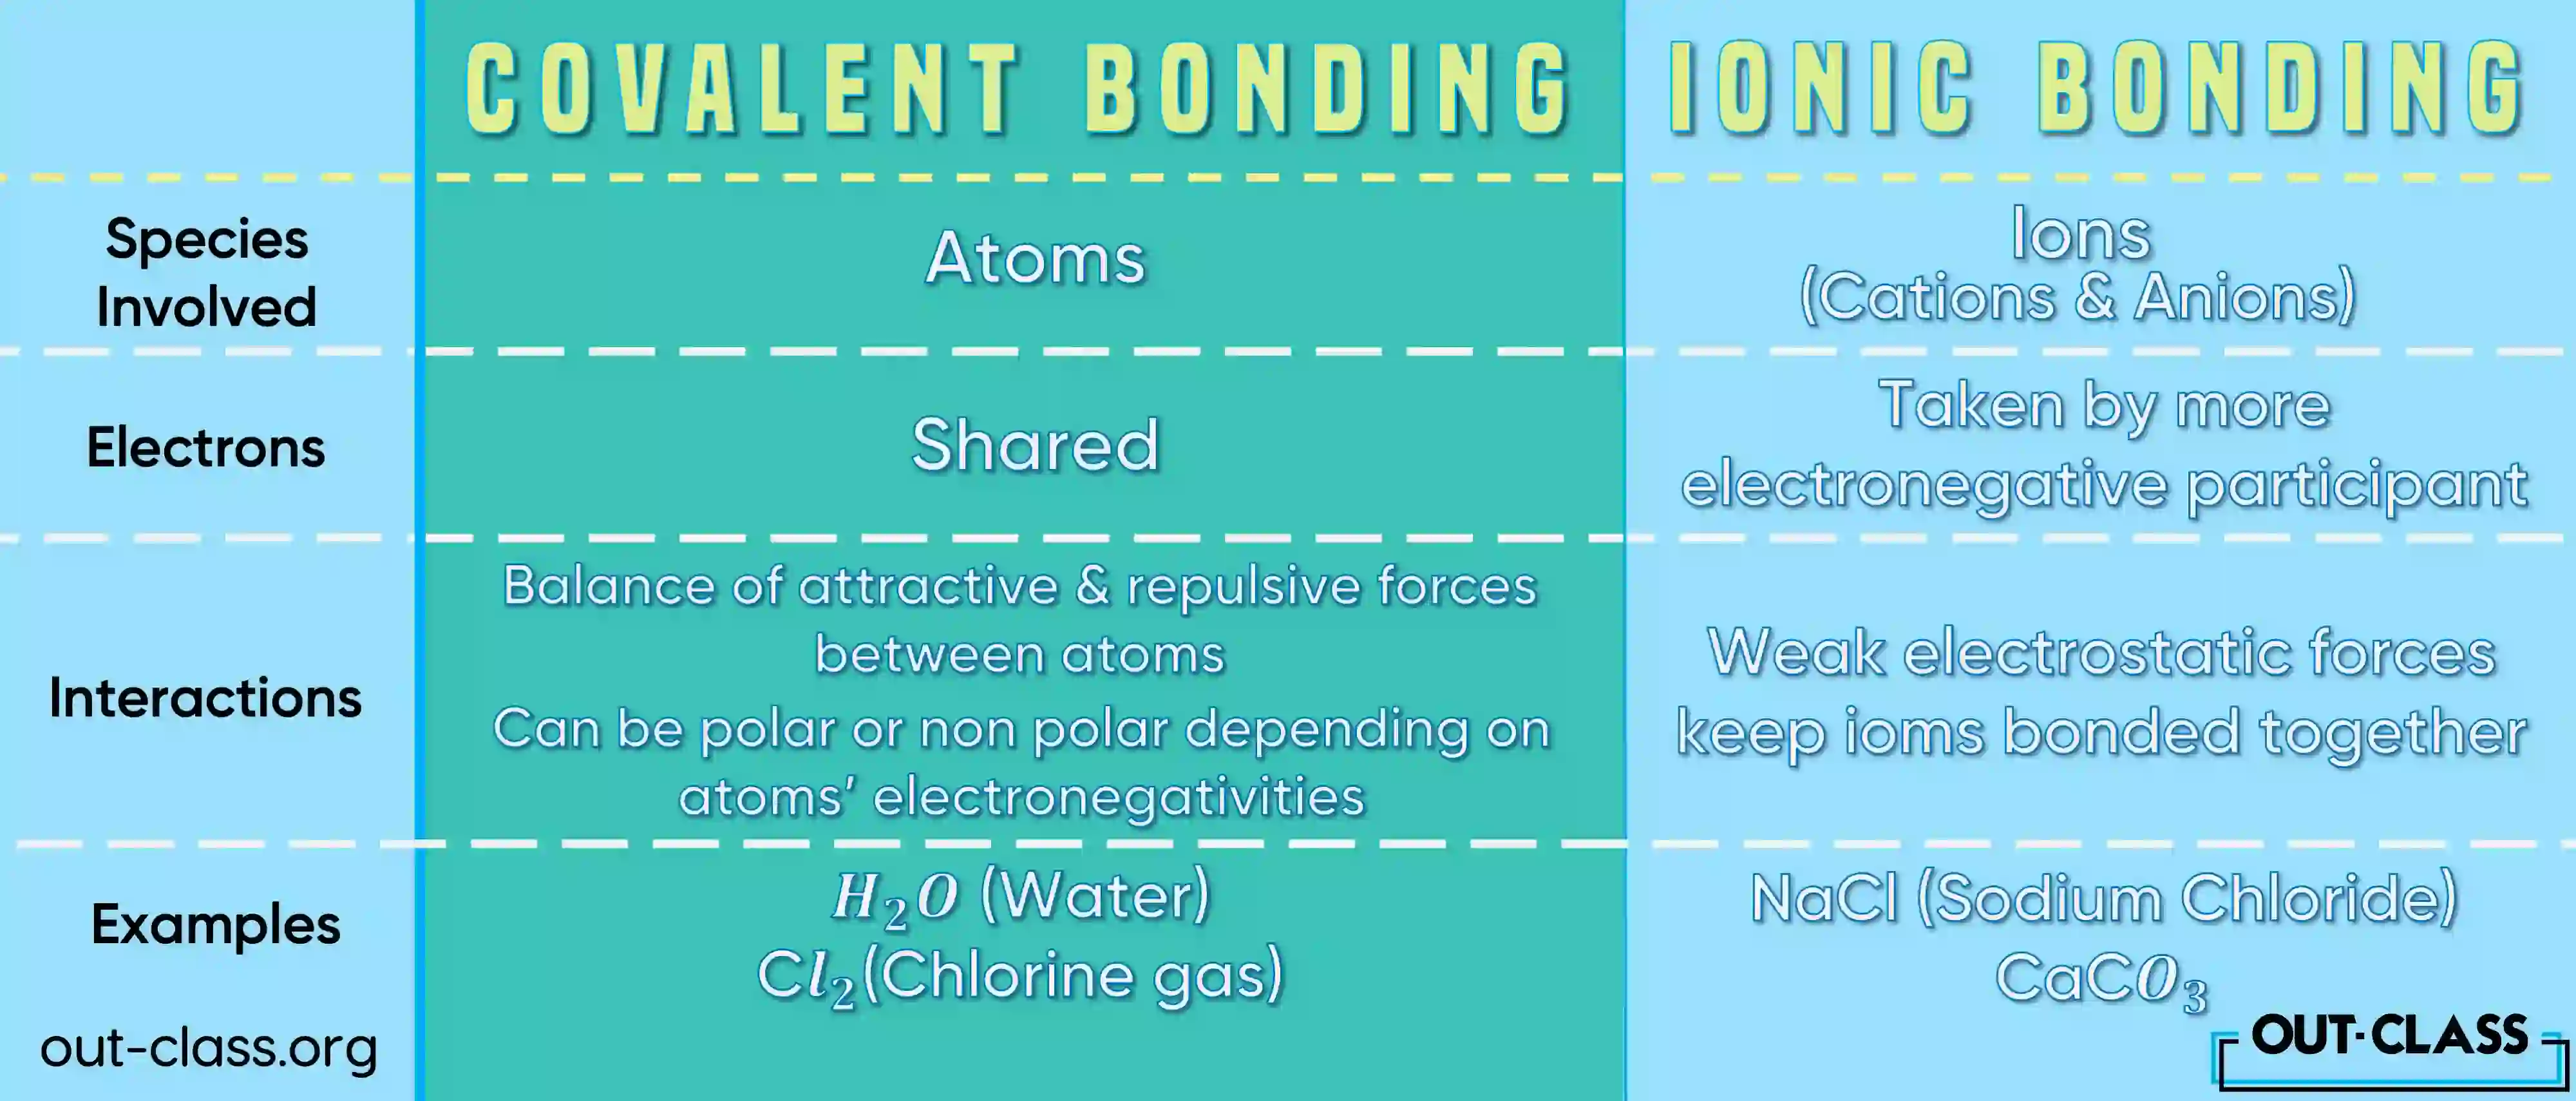 differences between ionic and covalent bond.